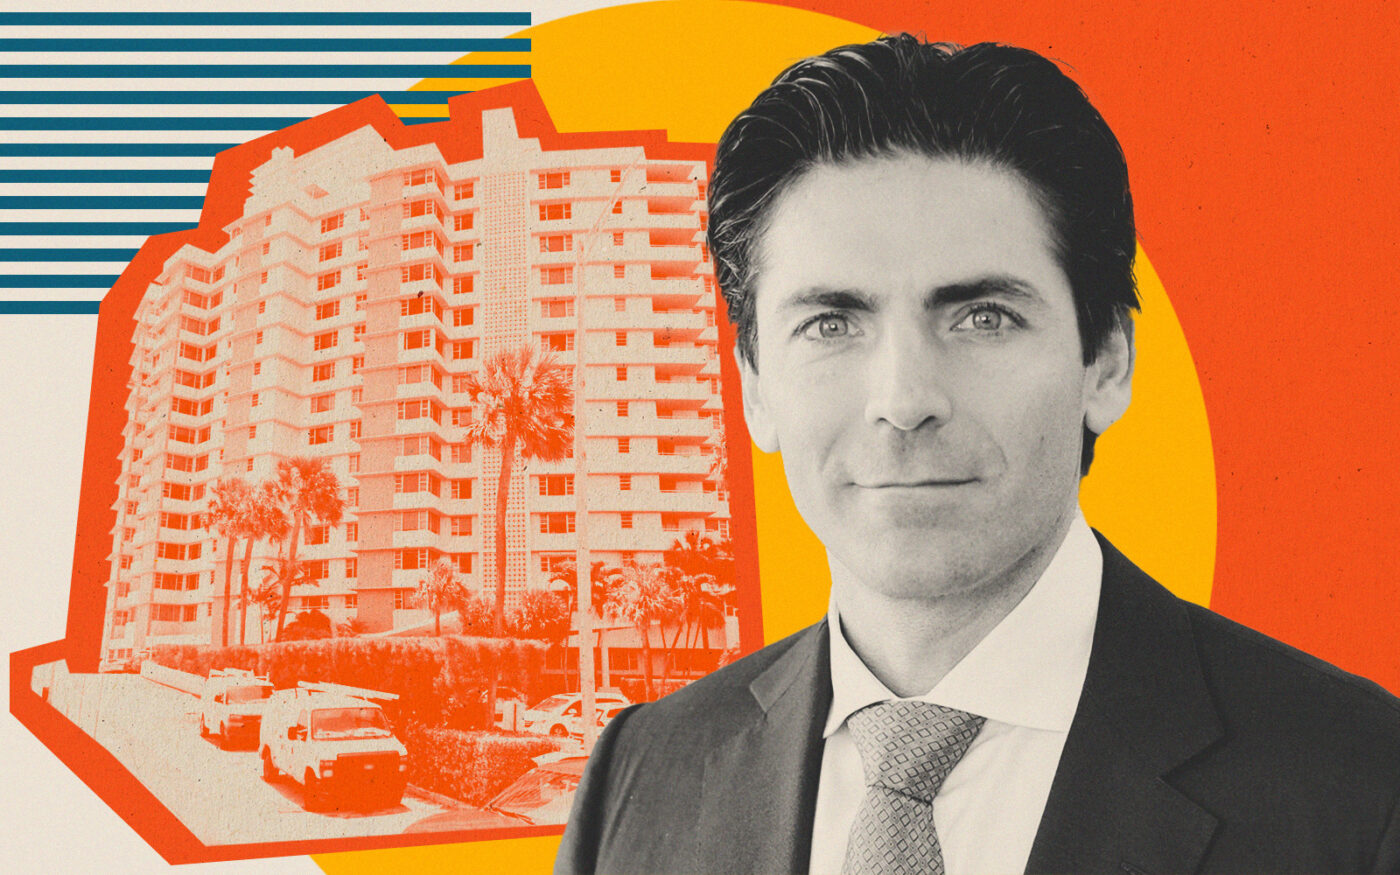 Mast Capital Seeks Buyout of Imperial House in Miami Beach